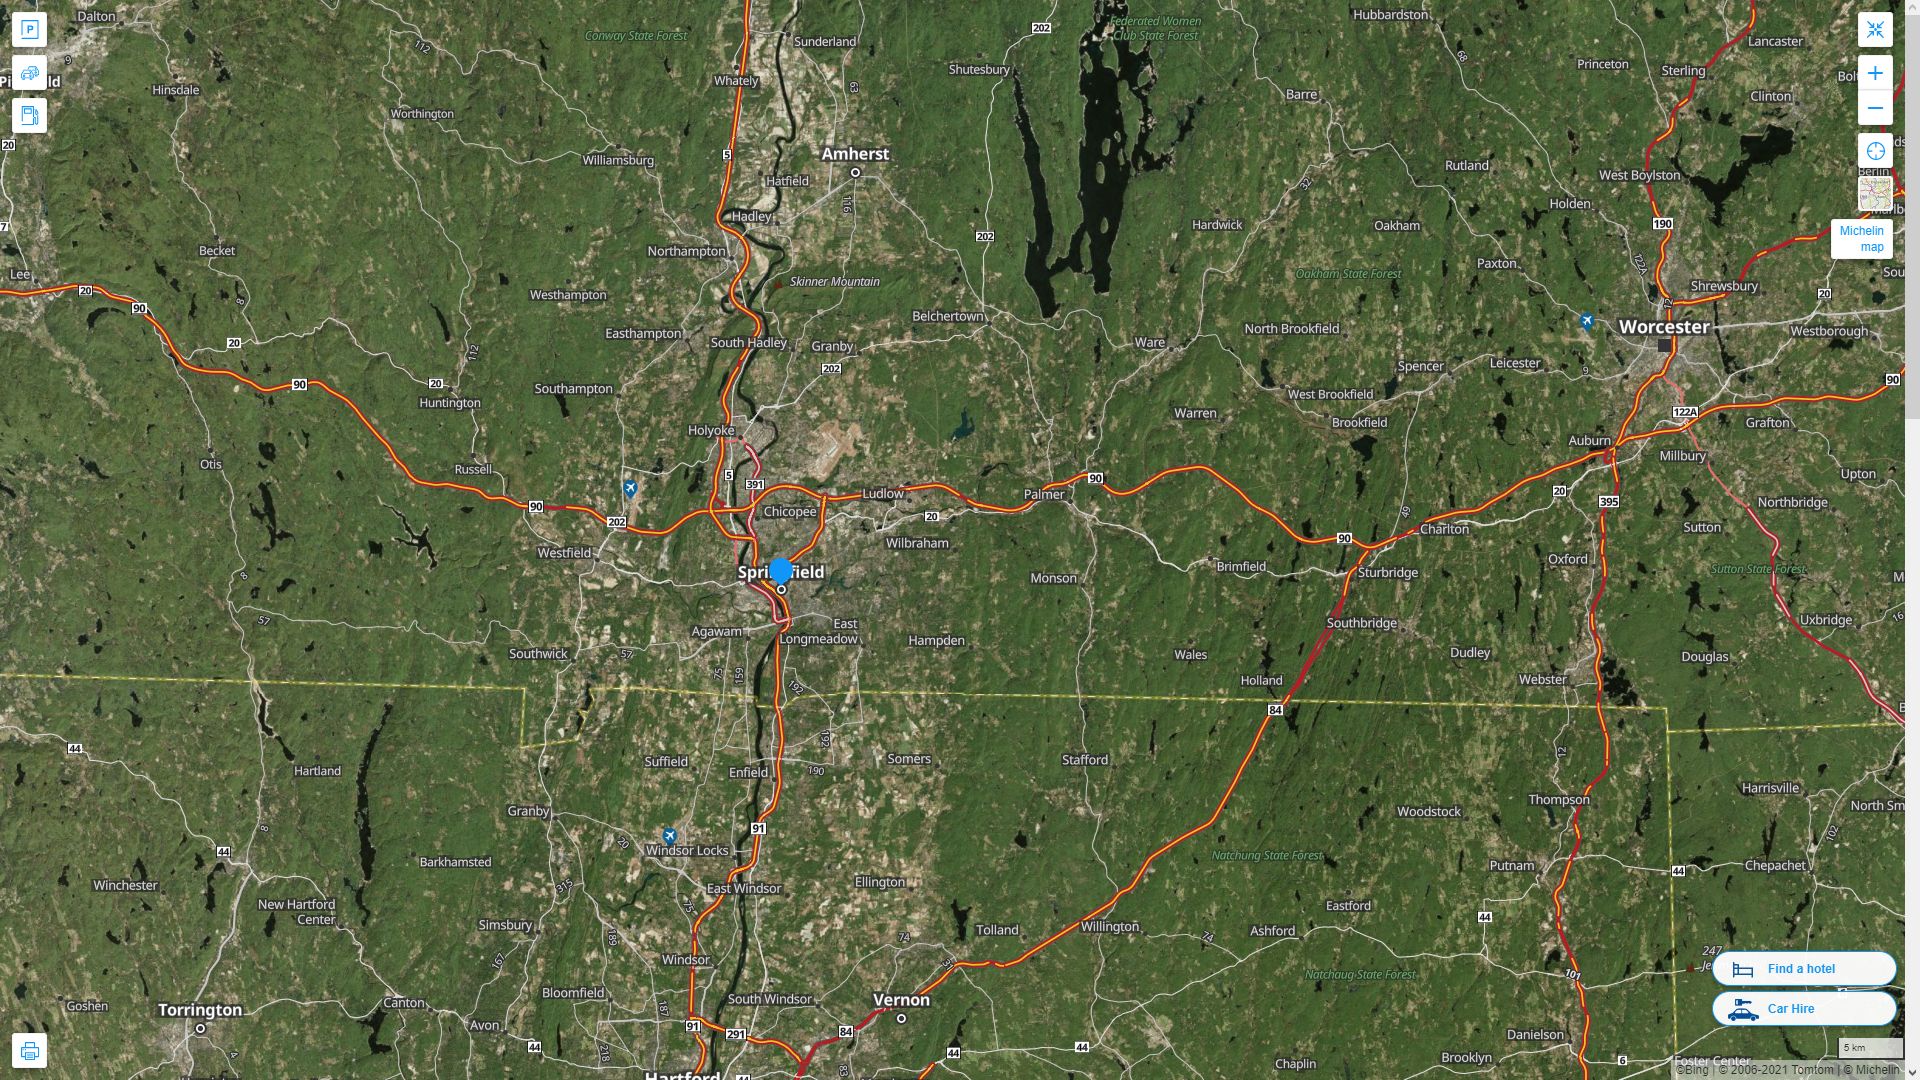 Springfield Massachusetts Highway and Road Map with Satellite View